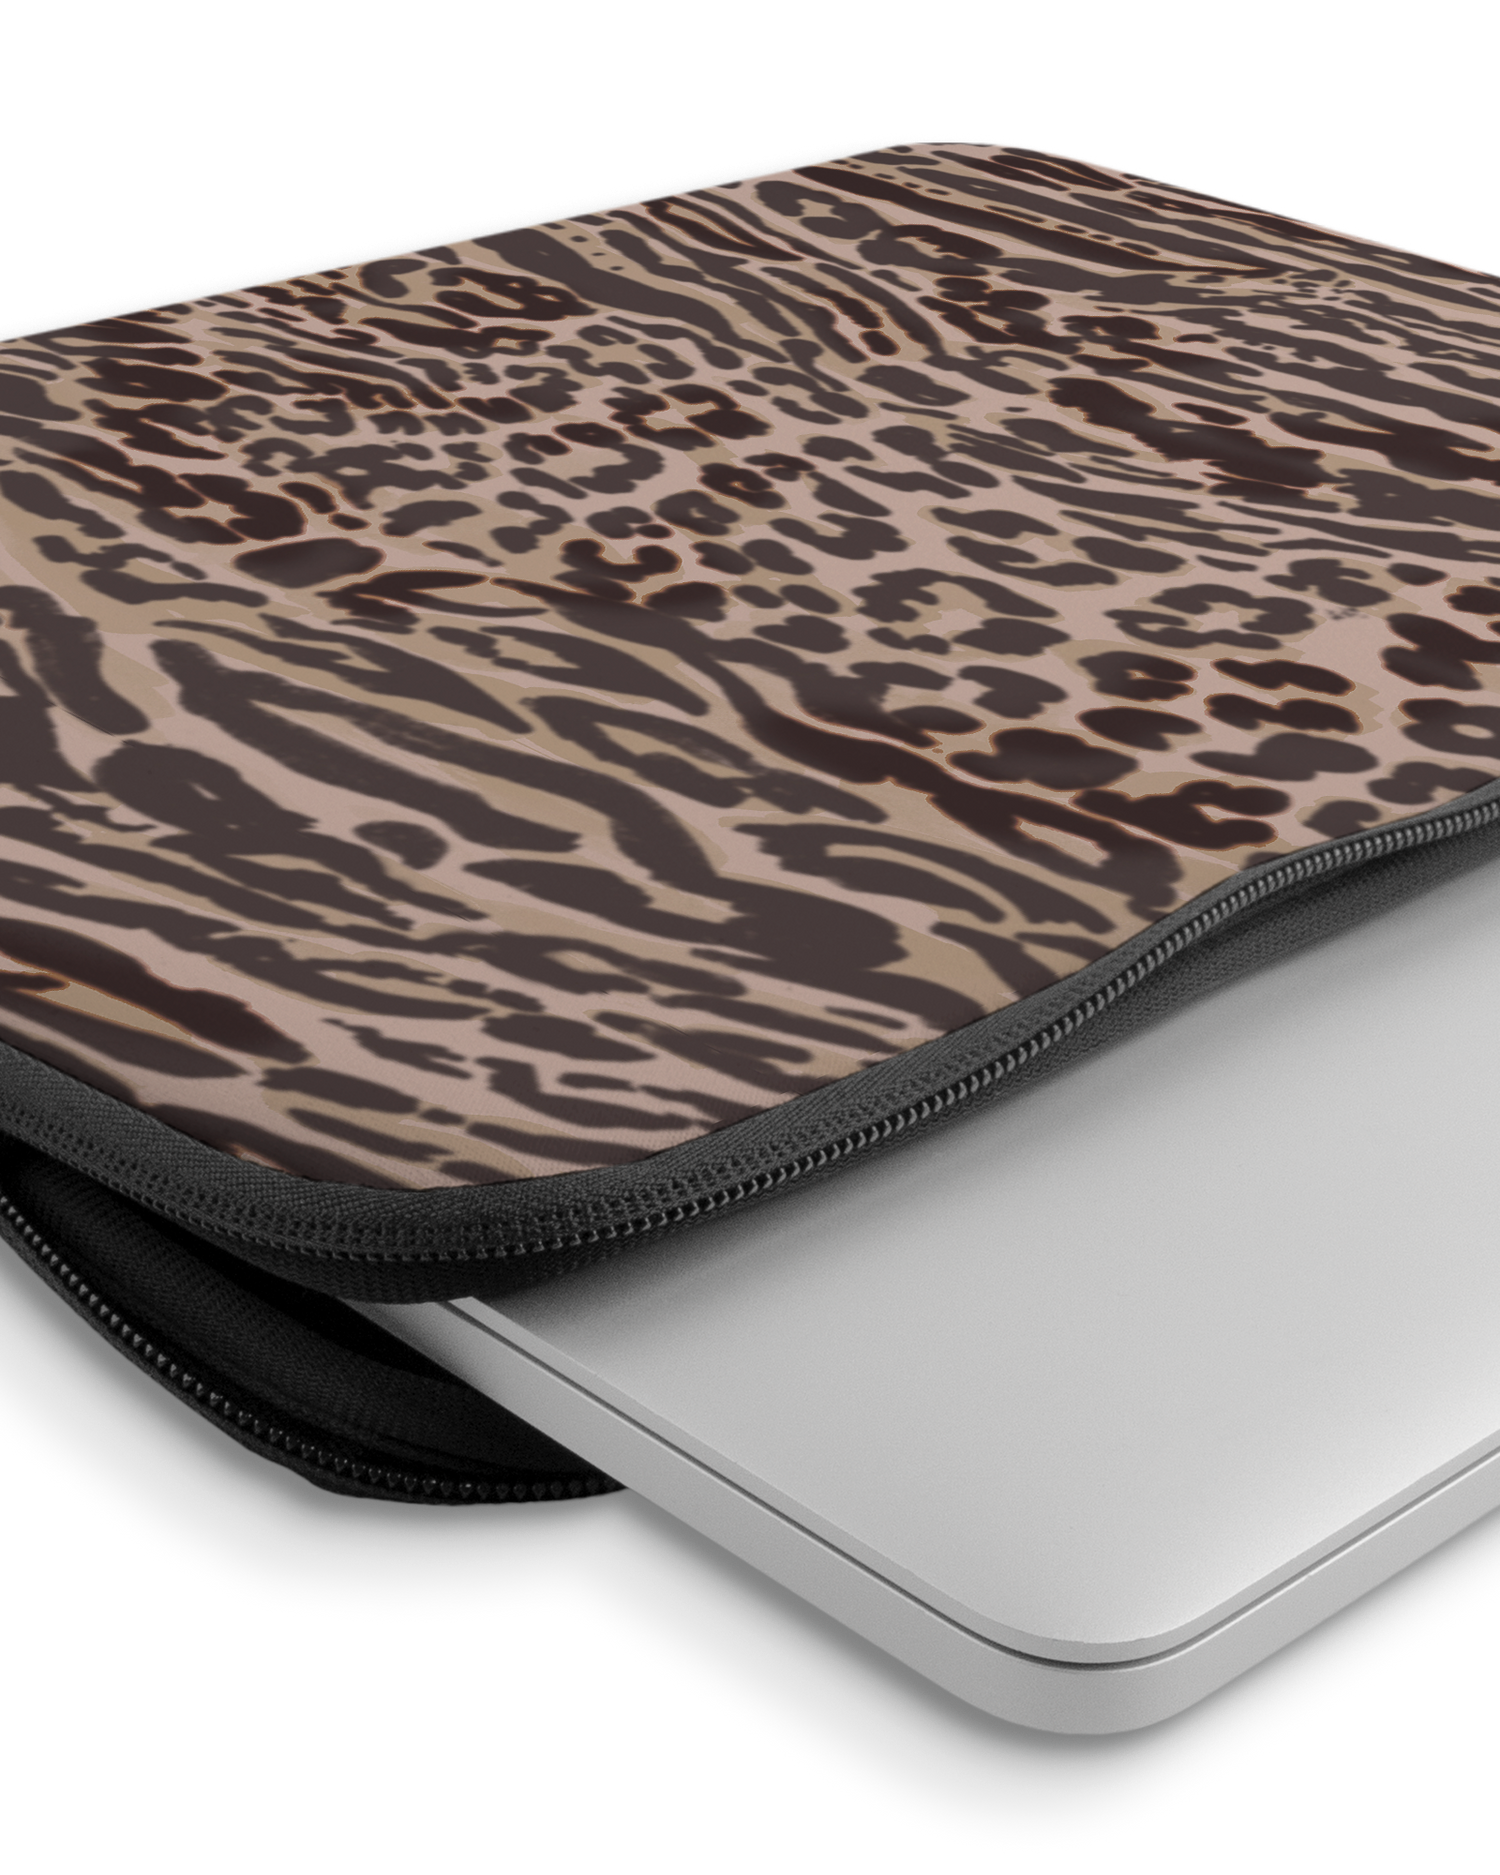 Animal Skin Tough Love Laptop Case 14-15 inch with device inside